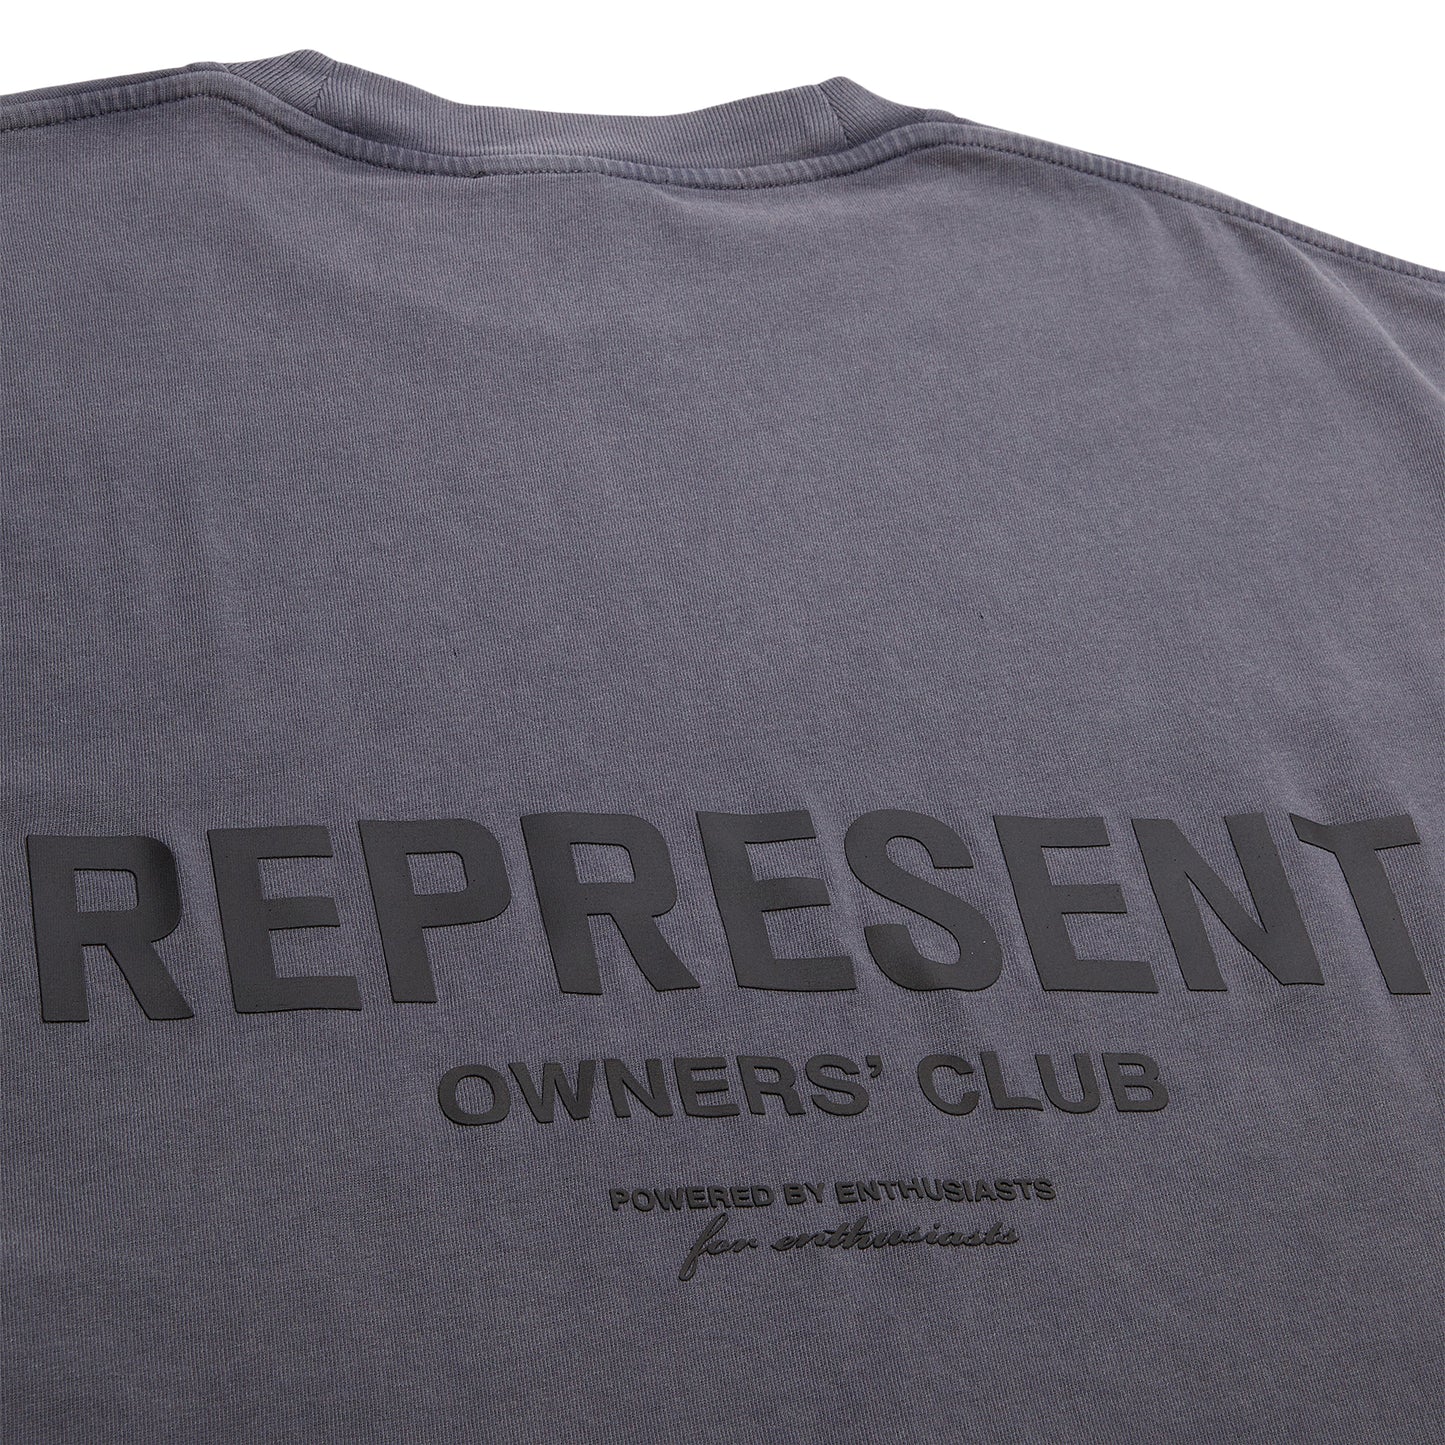 REPRESENT Owners Club T-Shirt (Storm)